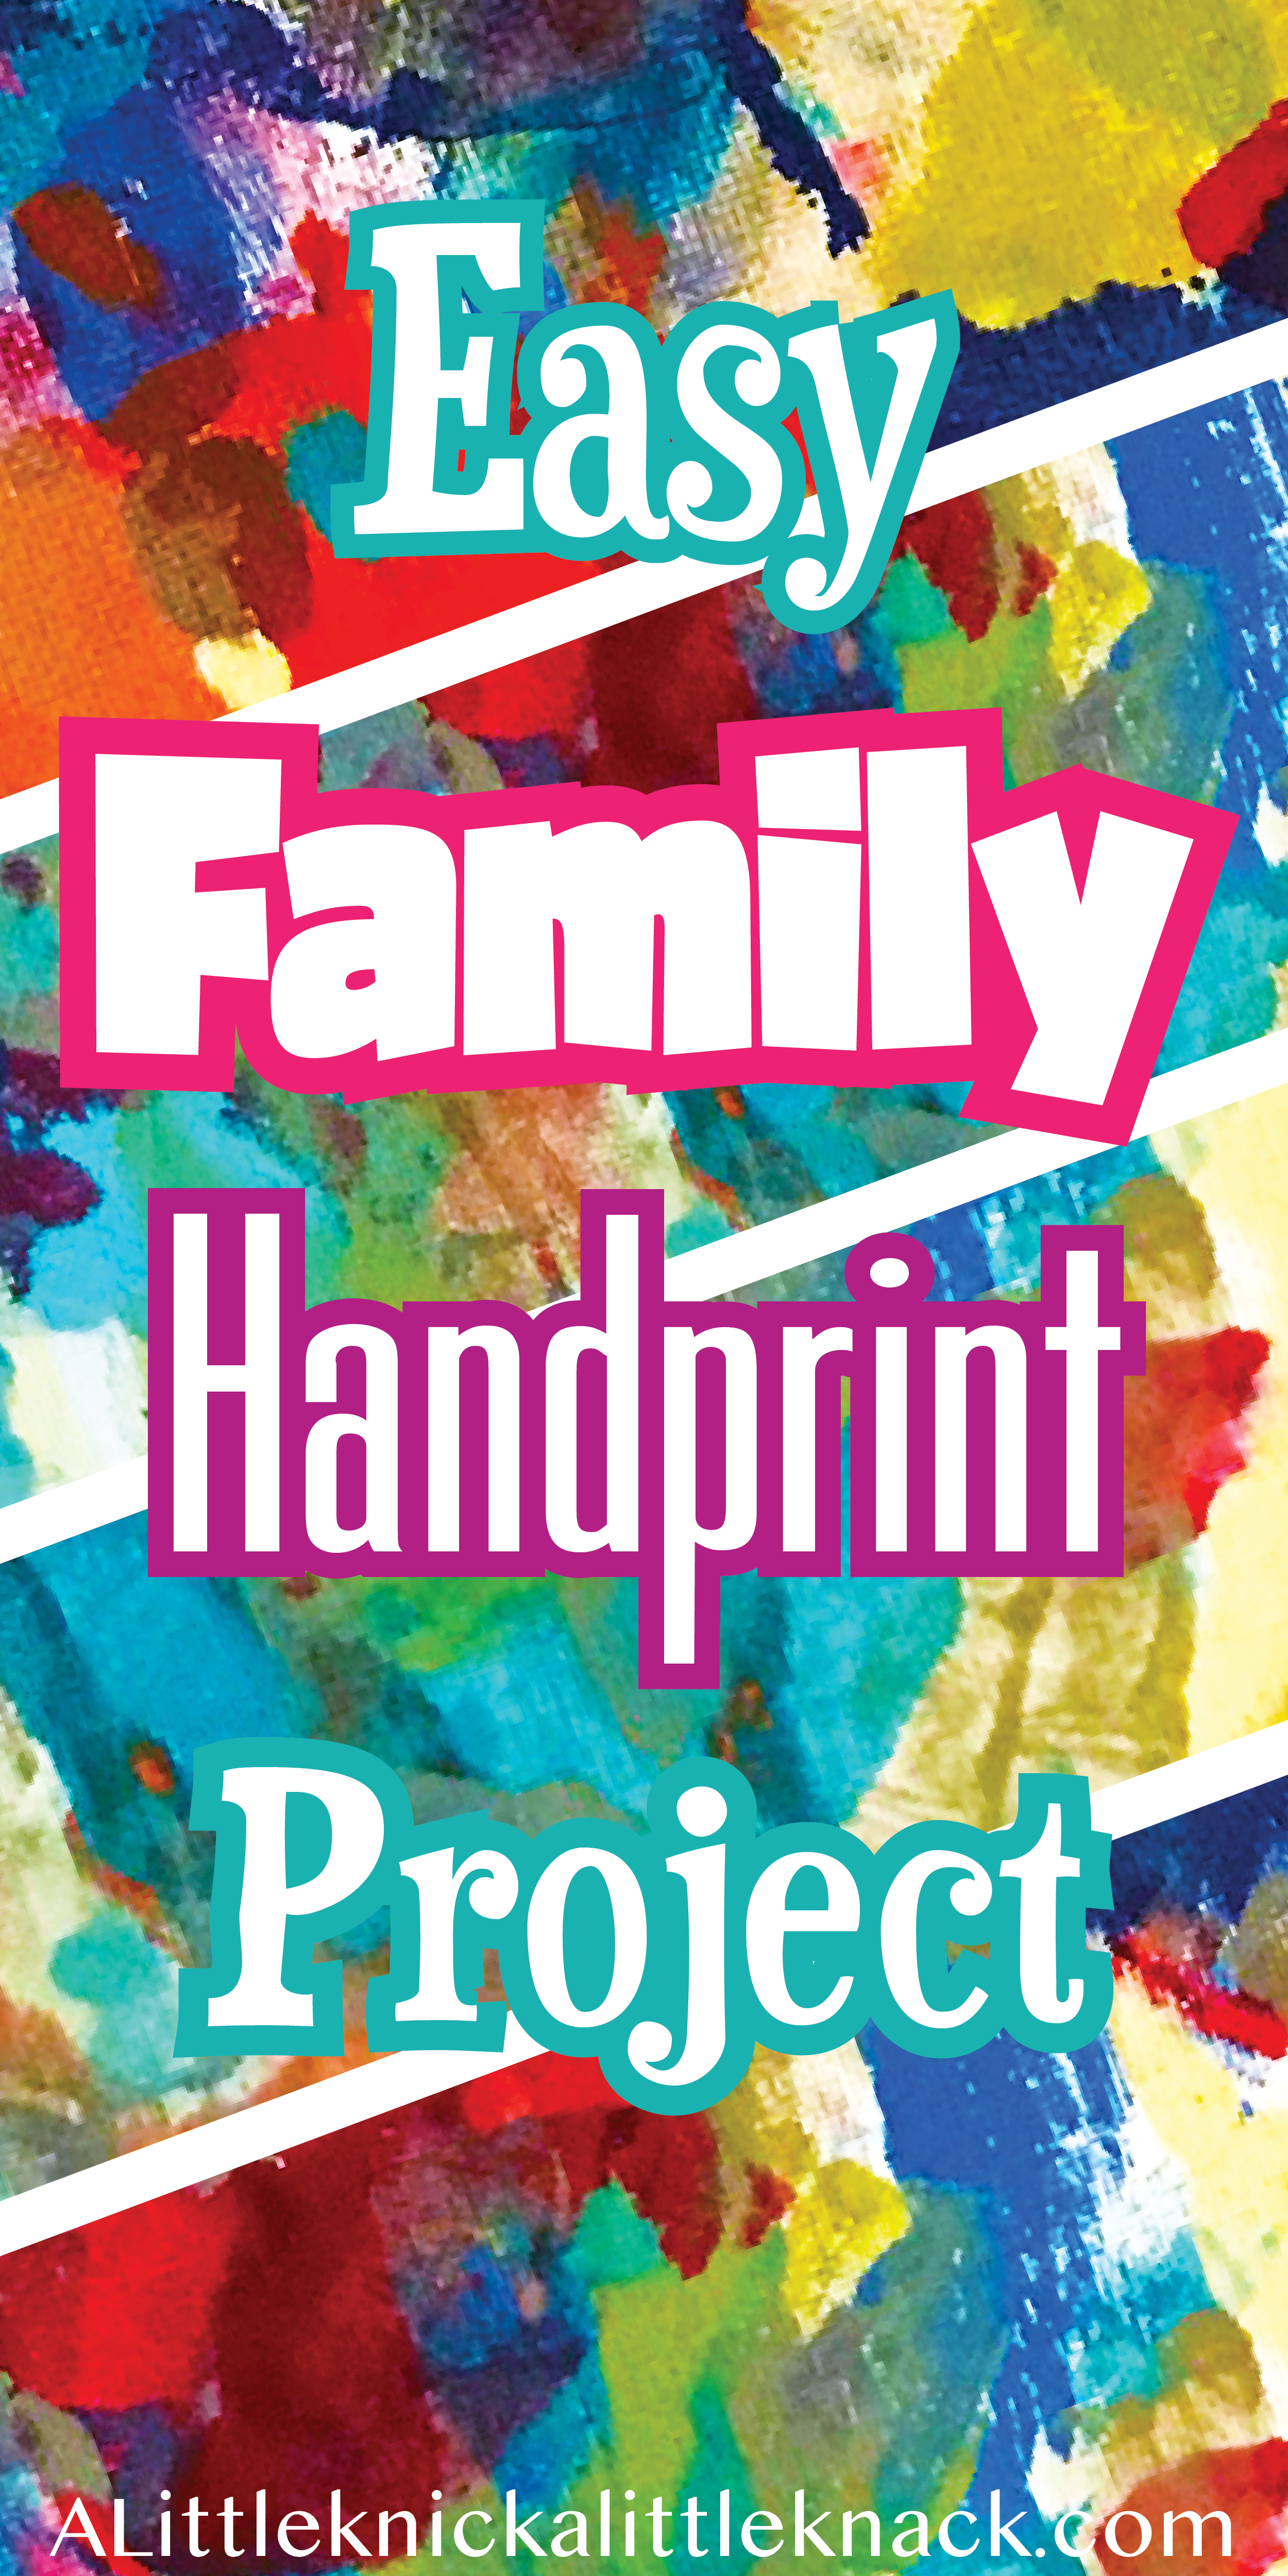 Colorful collage of handprint art with text overlay.